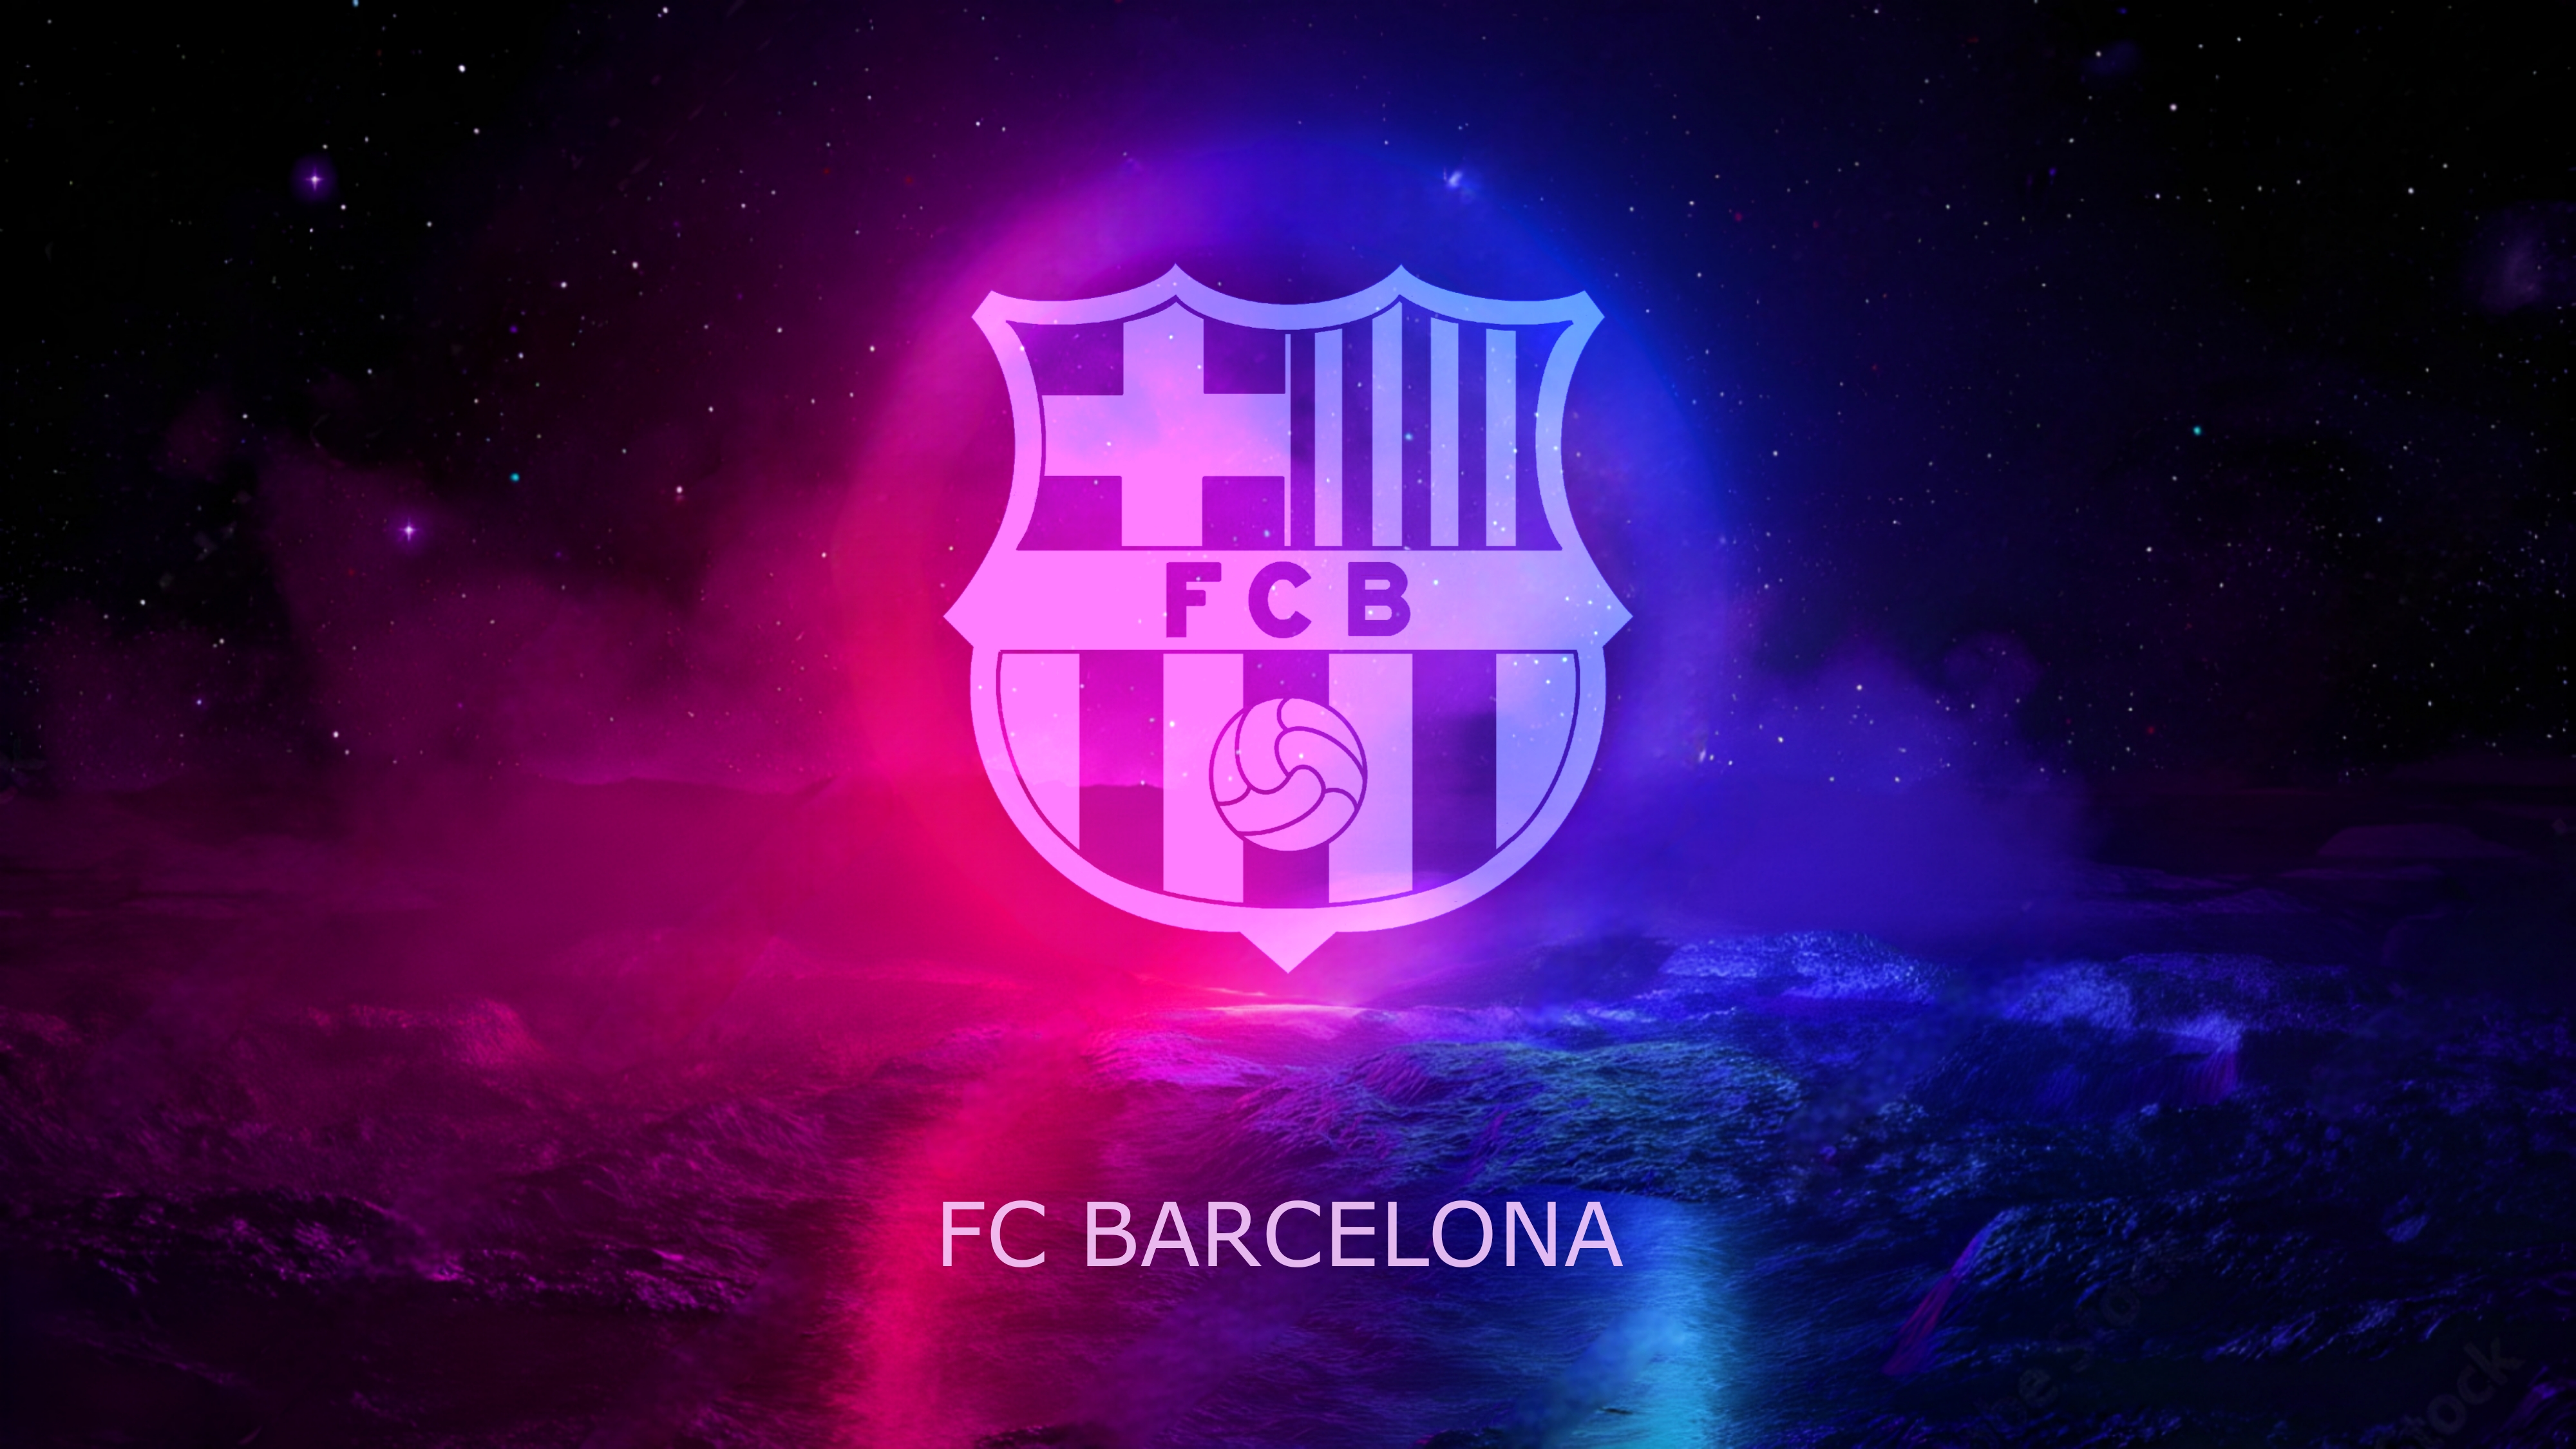 https://wall.alphacoders.com/by_sub_category.php?id=208194&name=FC+Barcelona+Wallpapers&lang=German